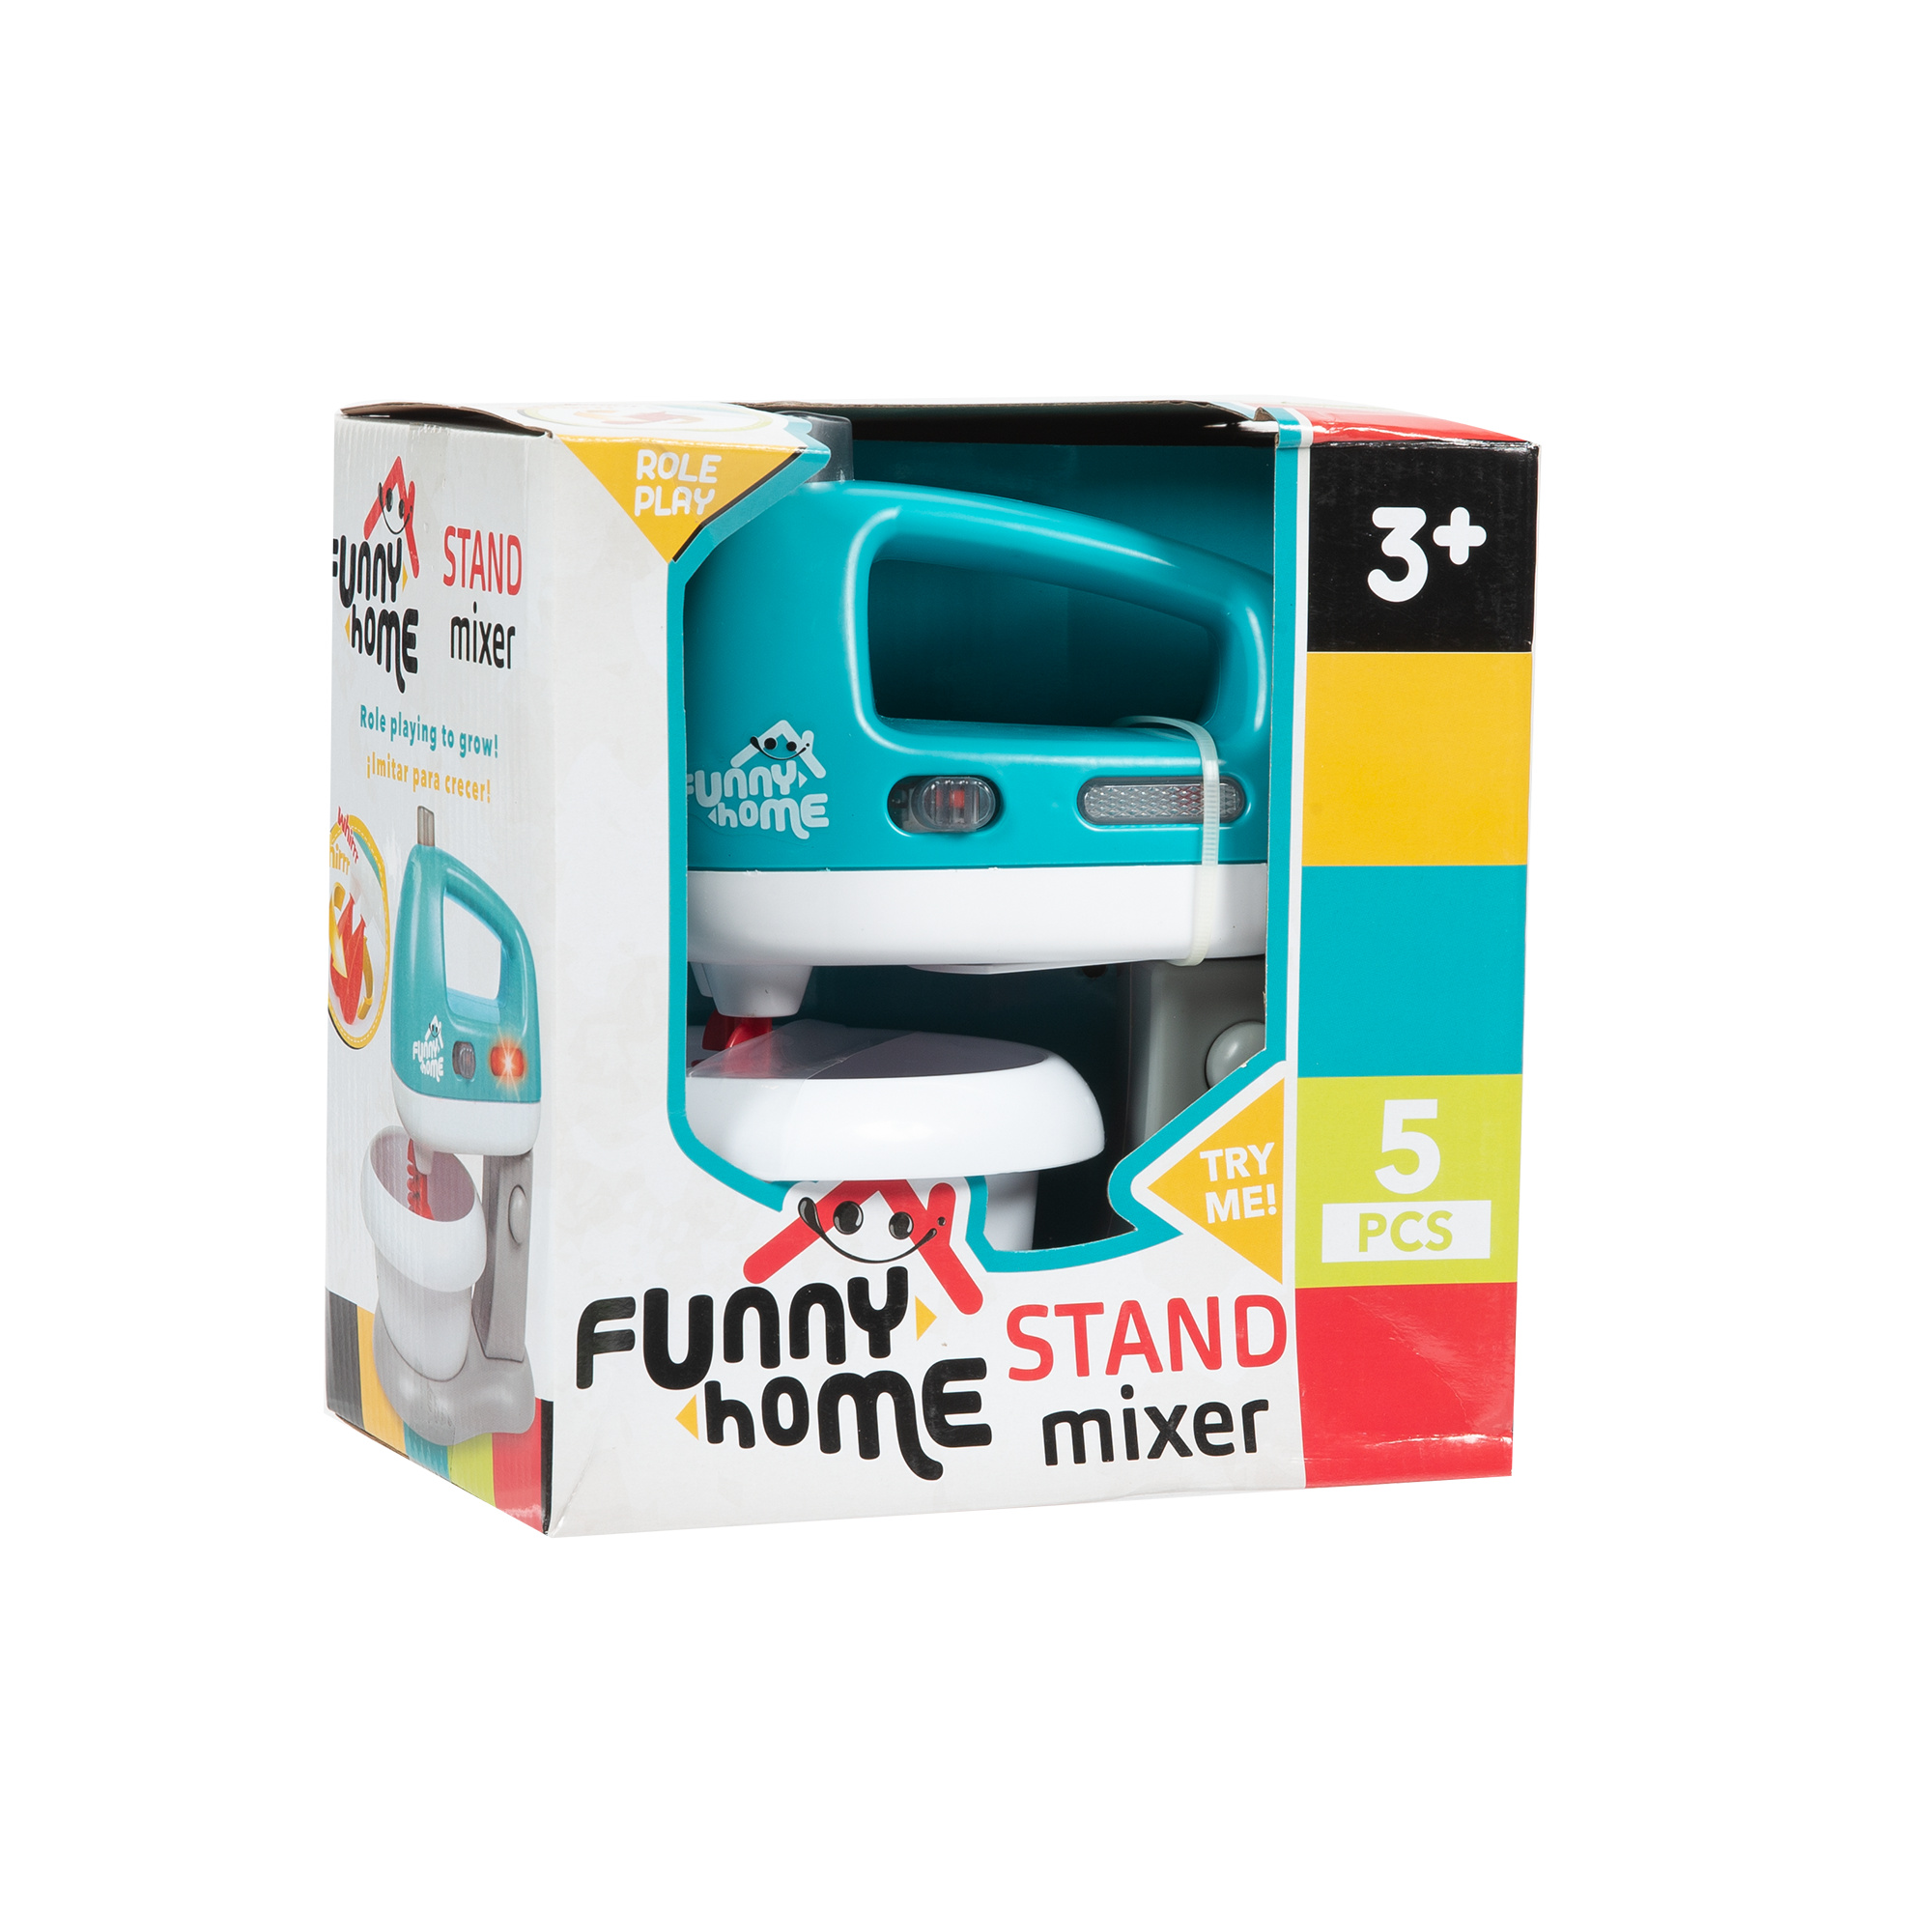 Mixer - funny home - Funny home